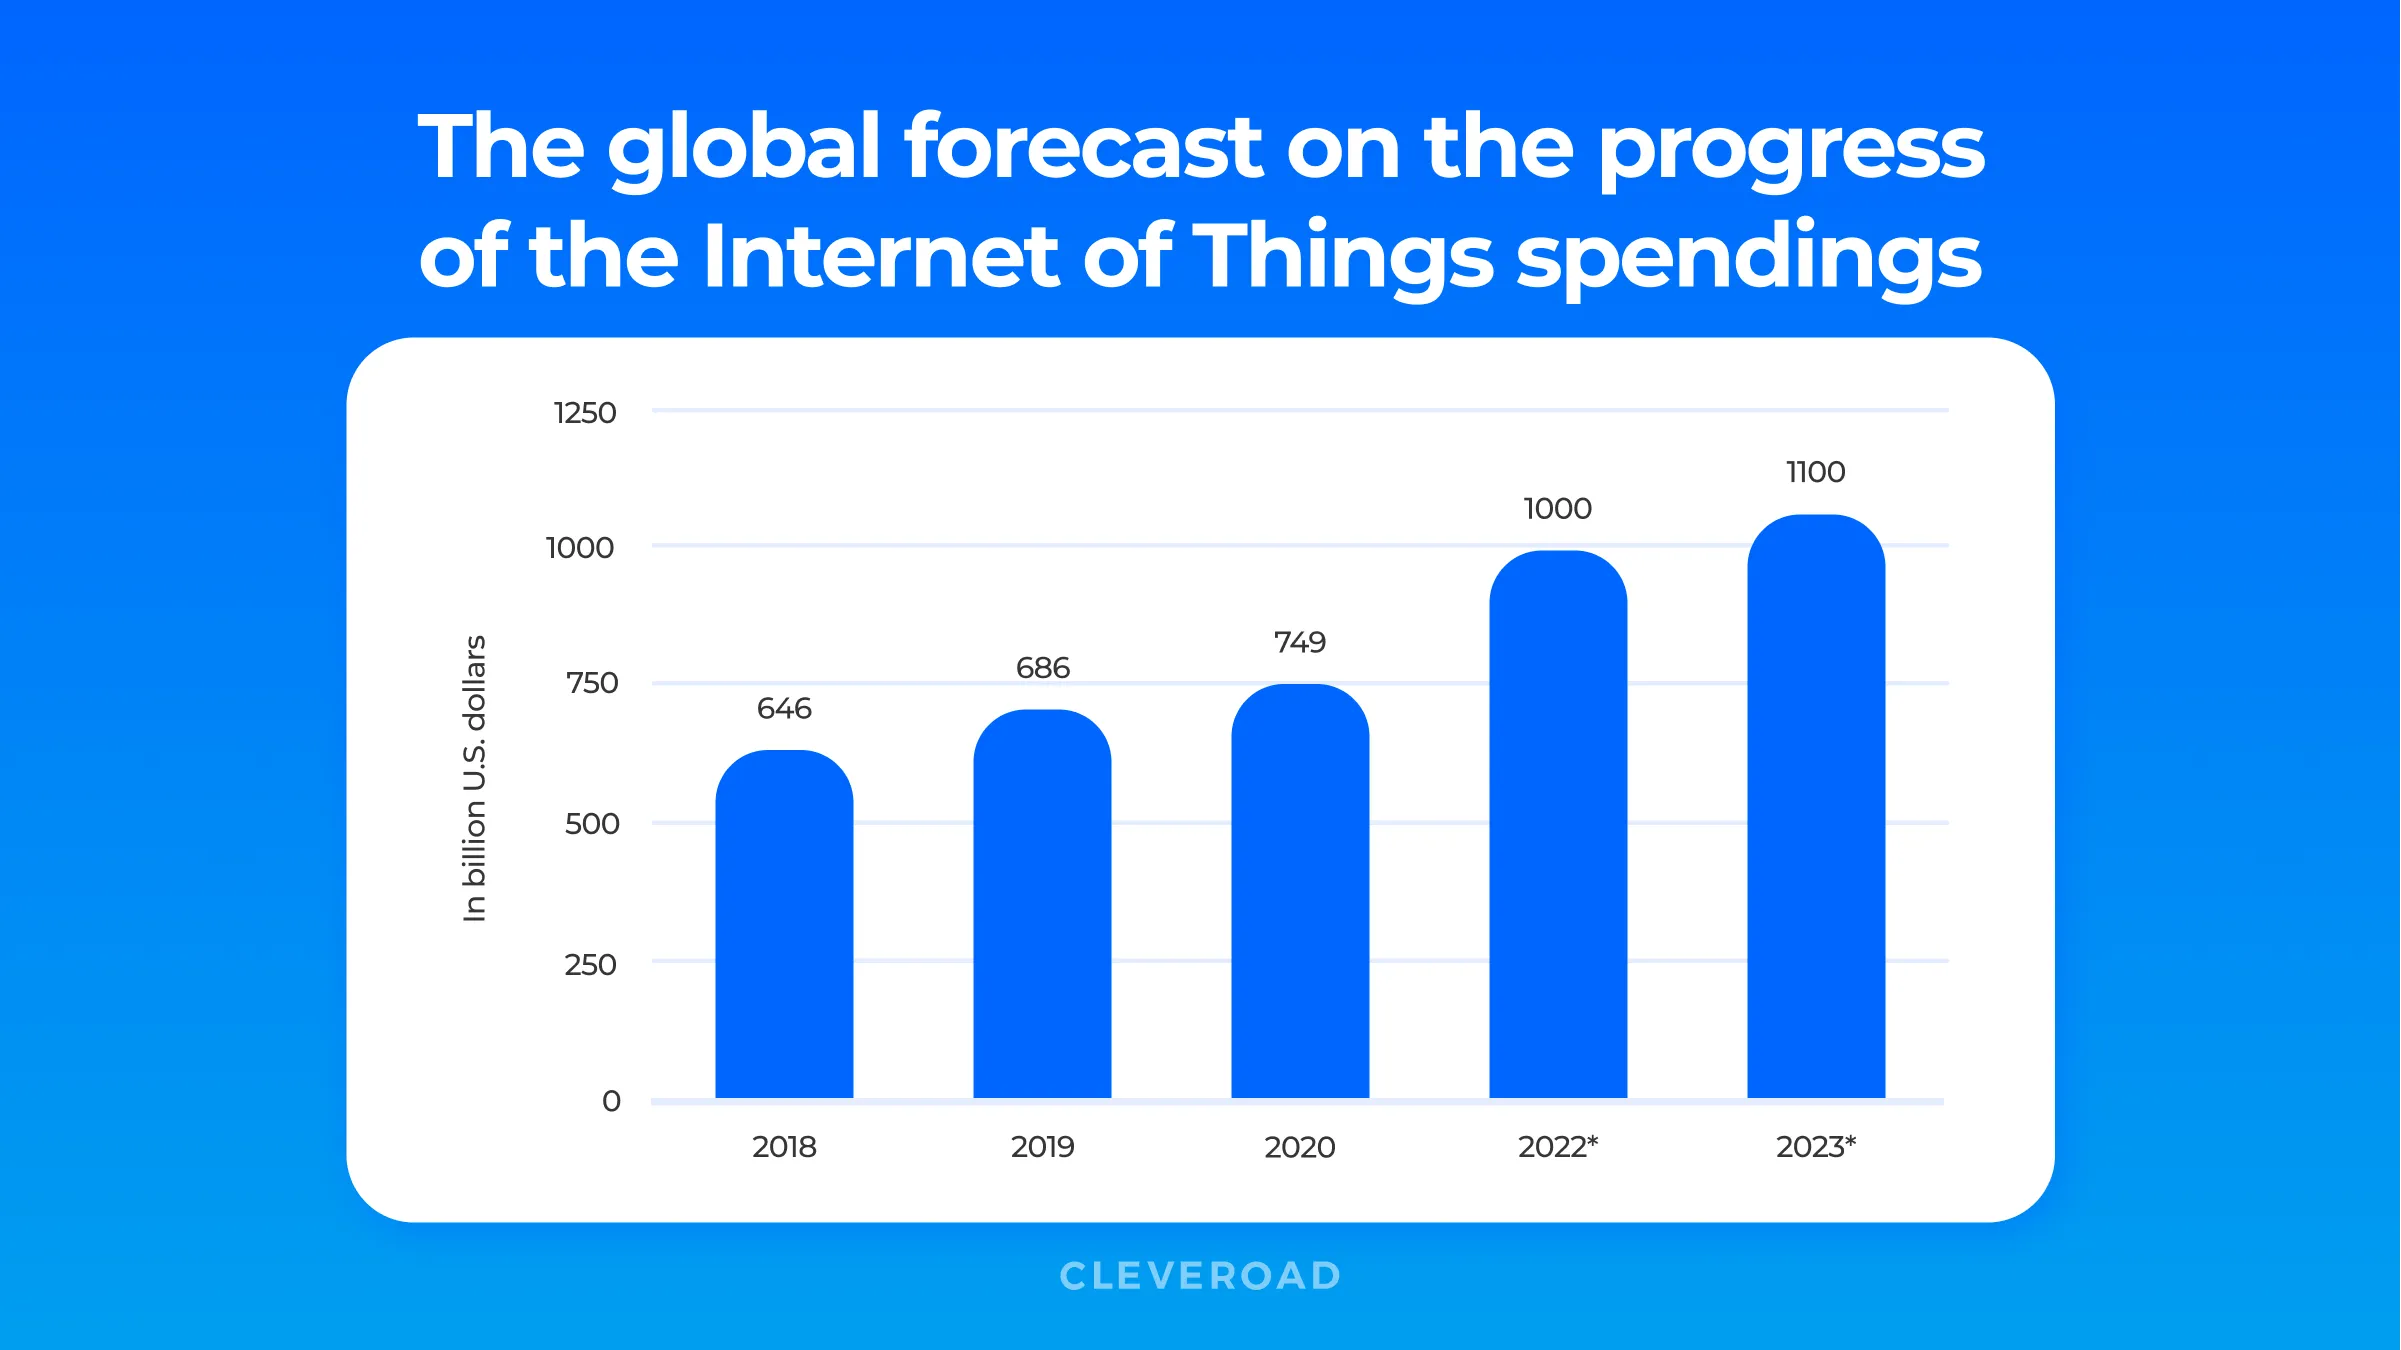 The global forecast on the progress of the Internet of Things spendings